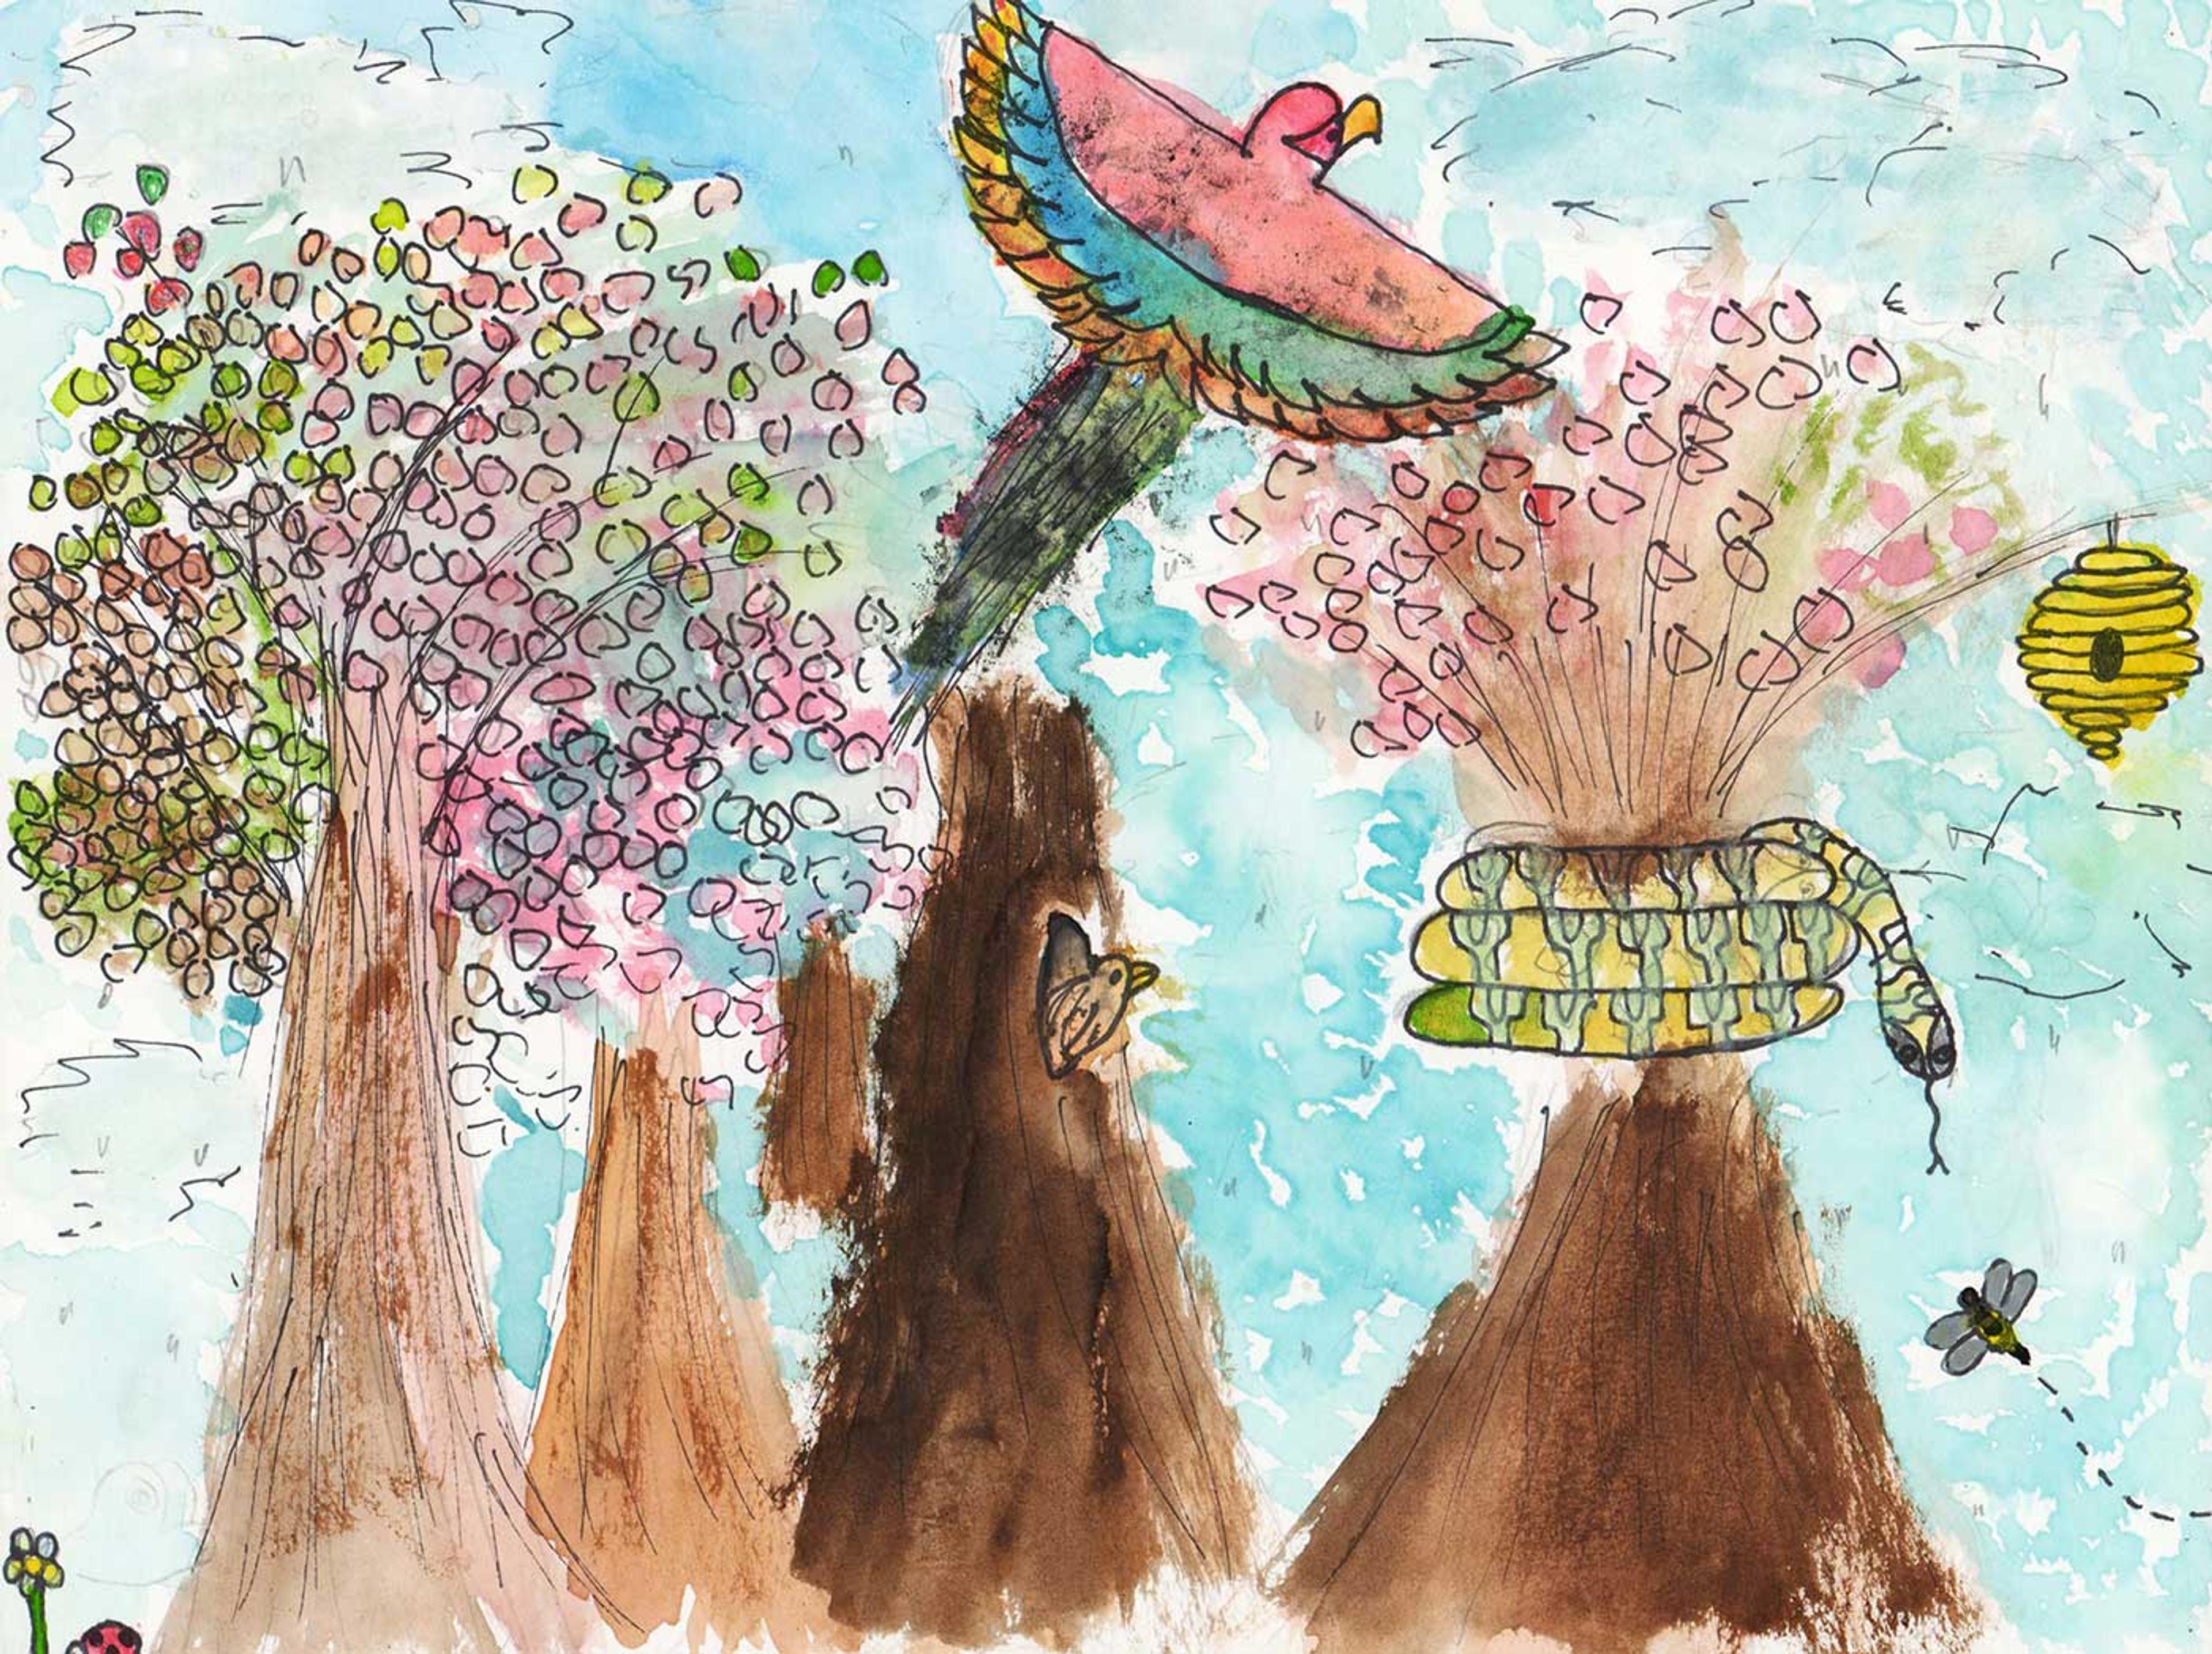 Watercolor of a red, blue, and orange parrot flying over trees with a snake and a beehive in the trees.